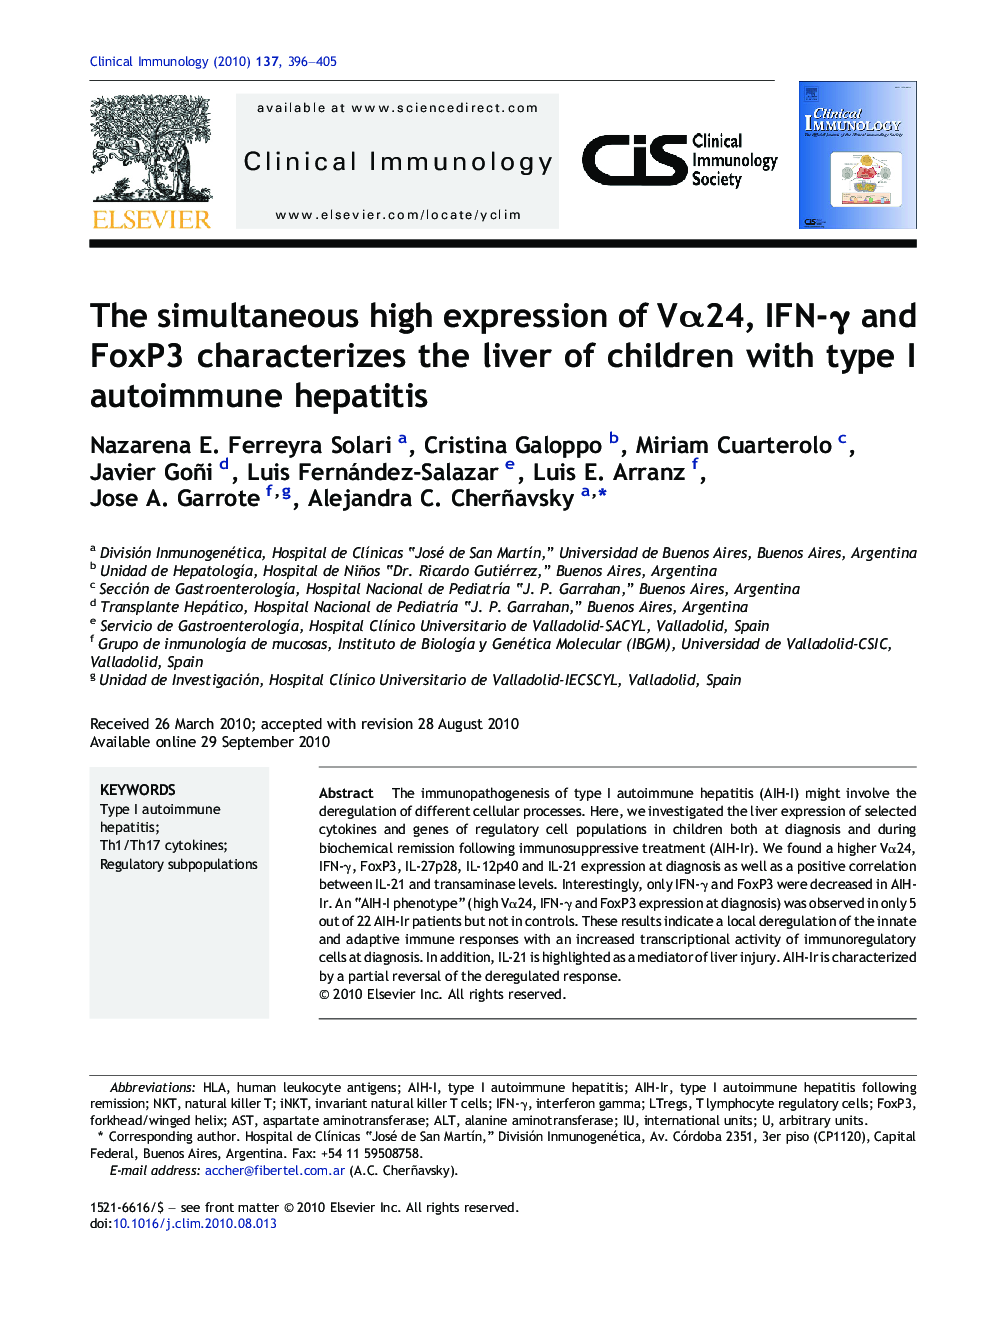 The simultaneous high expression of Vα24, IFN-γ and FoxP3 characterizes the liver of children with type I autoimmune hepatitis